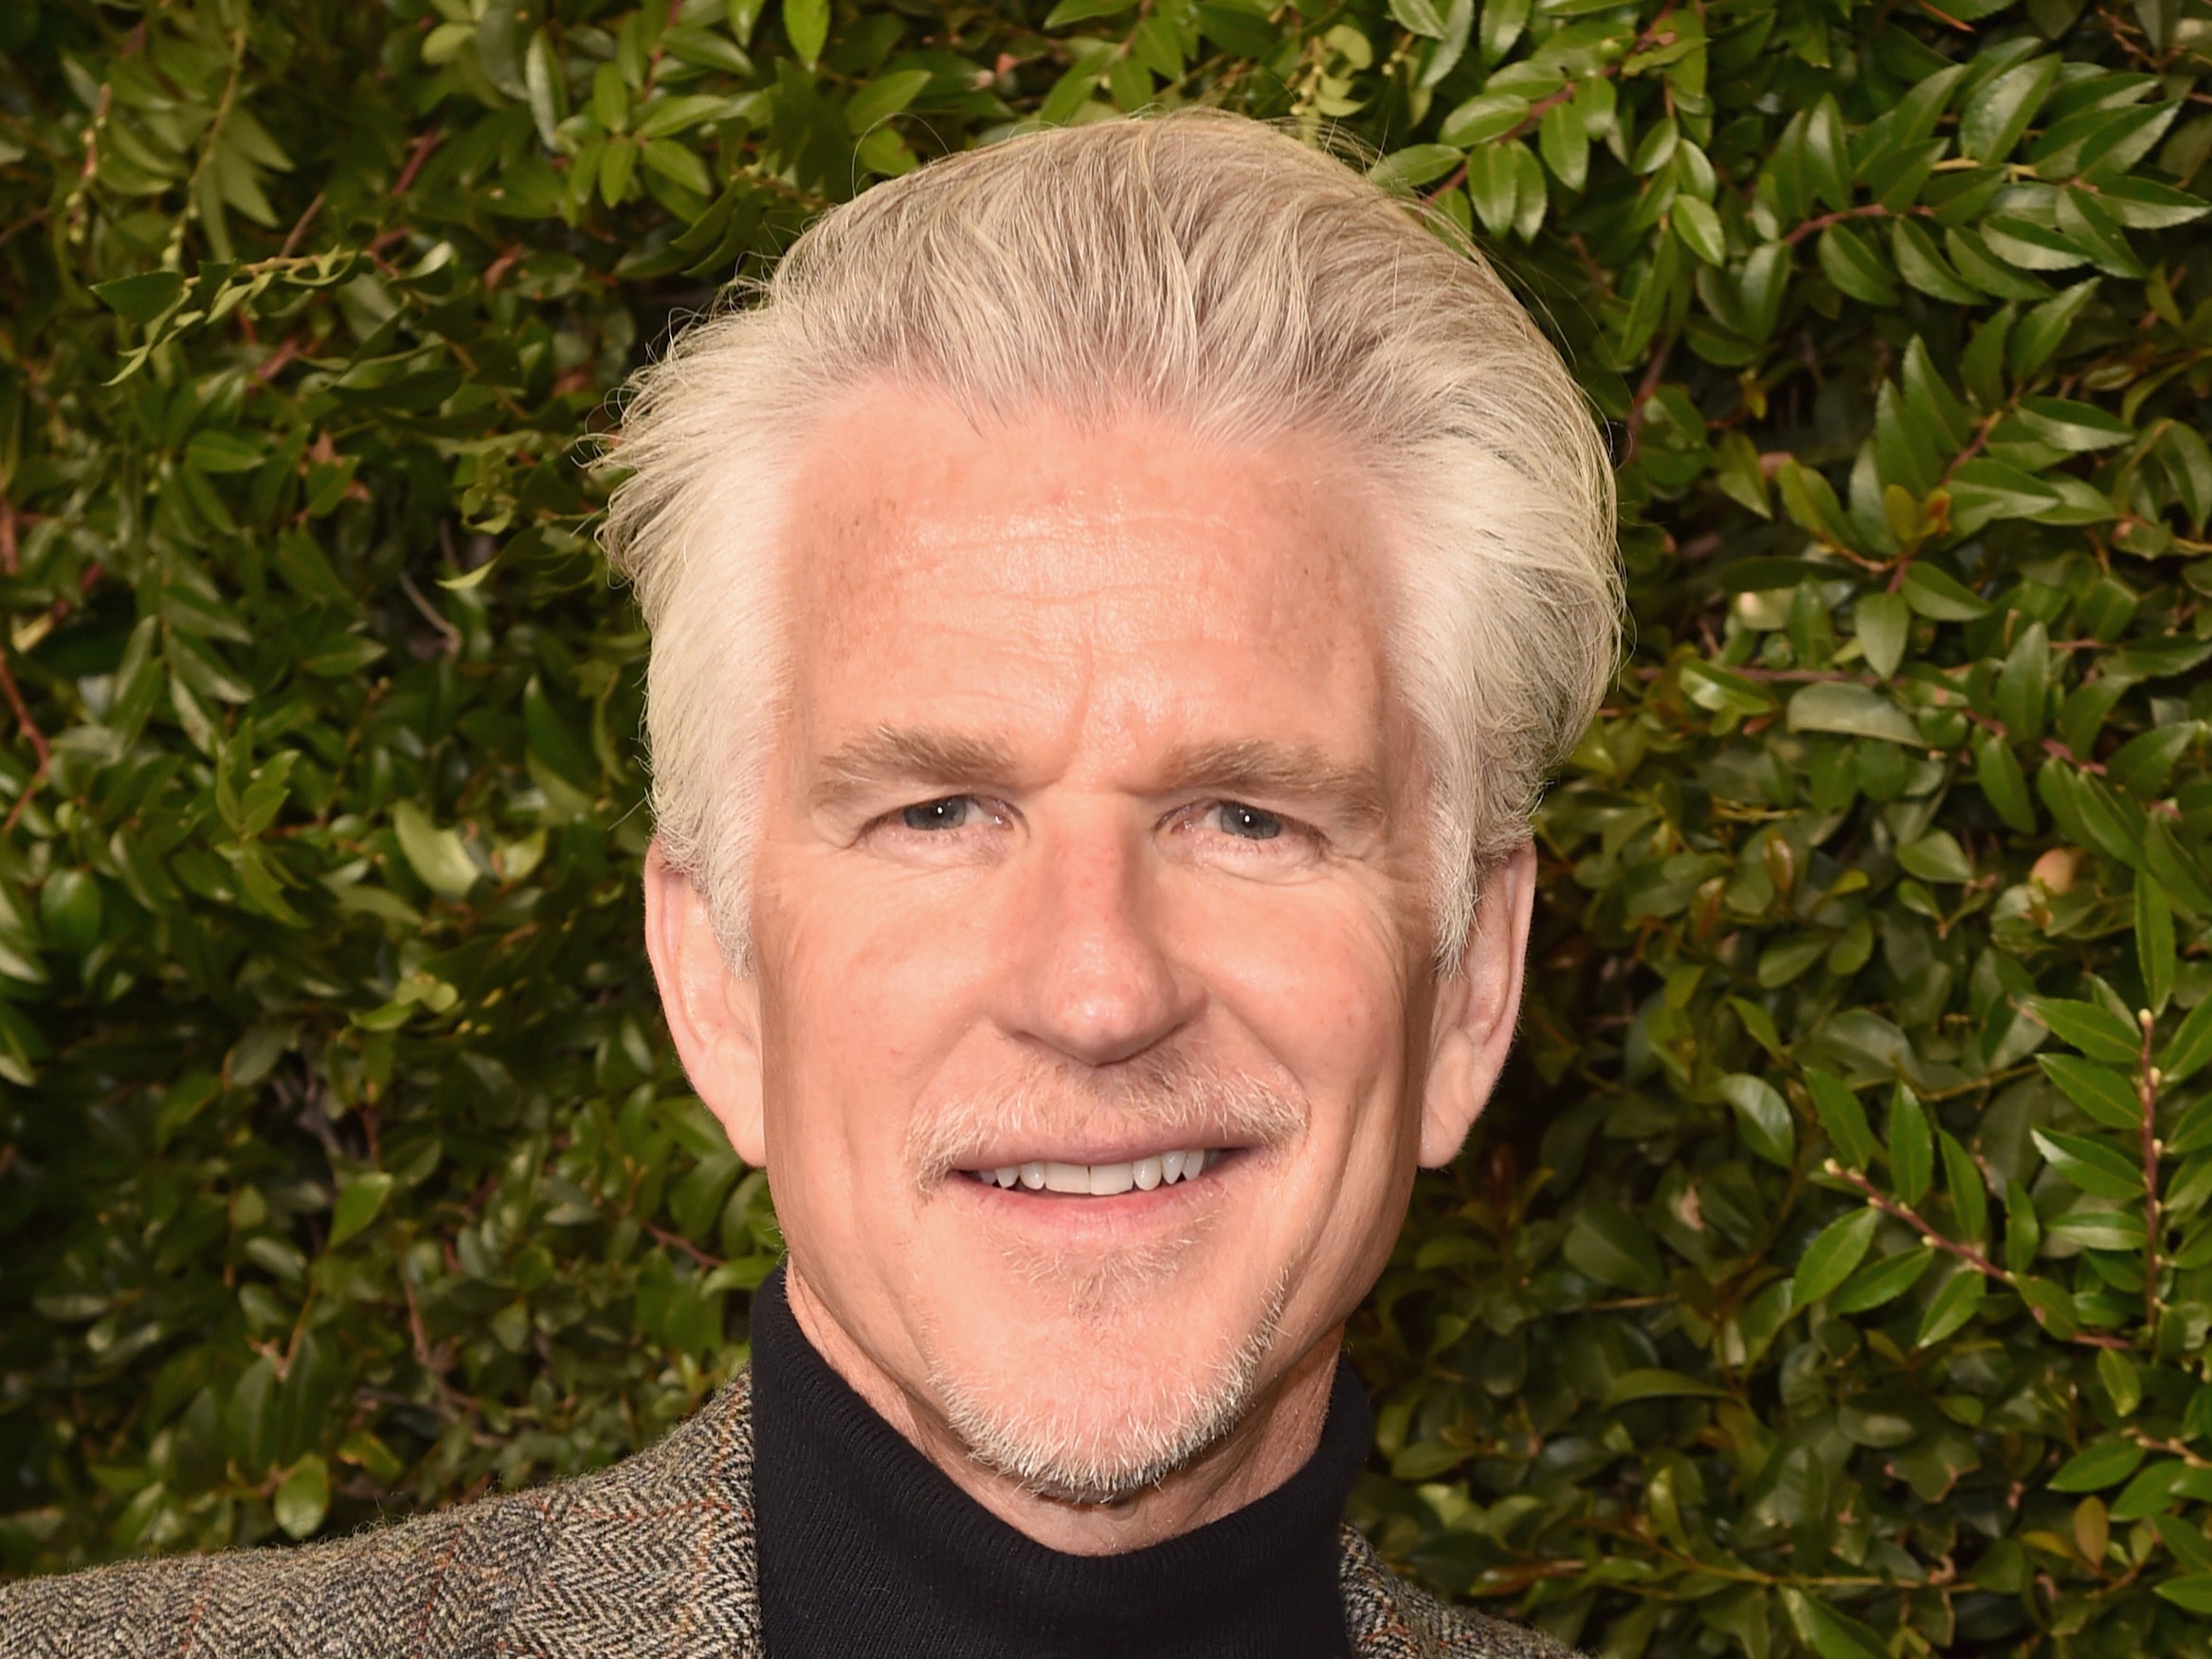 “I wish I’d have said yes a little bit more often:’ Matthew Modine on the film he regrets turning down